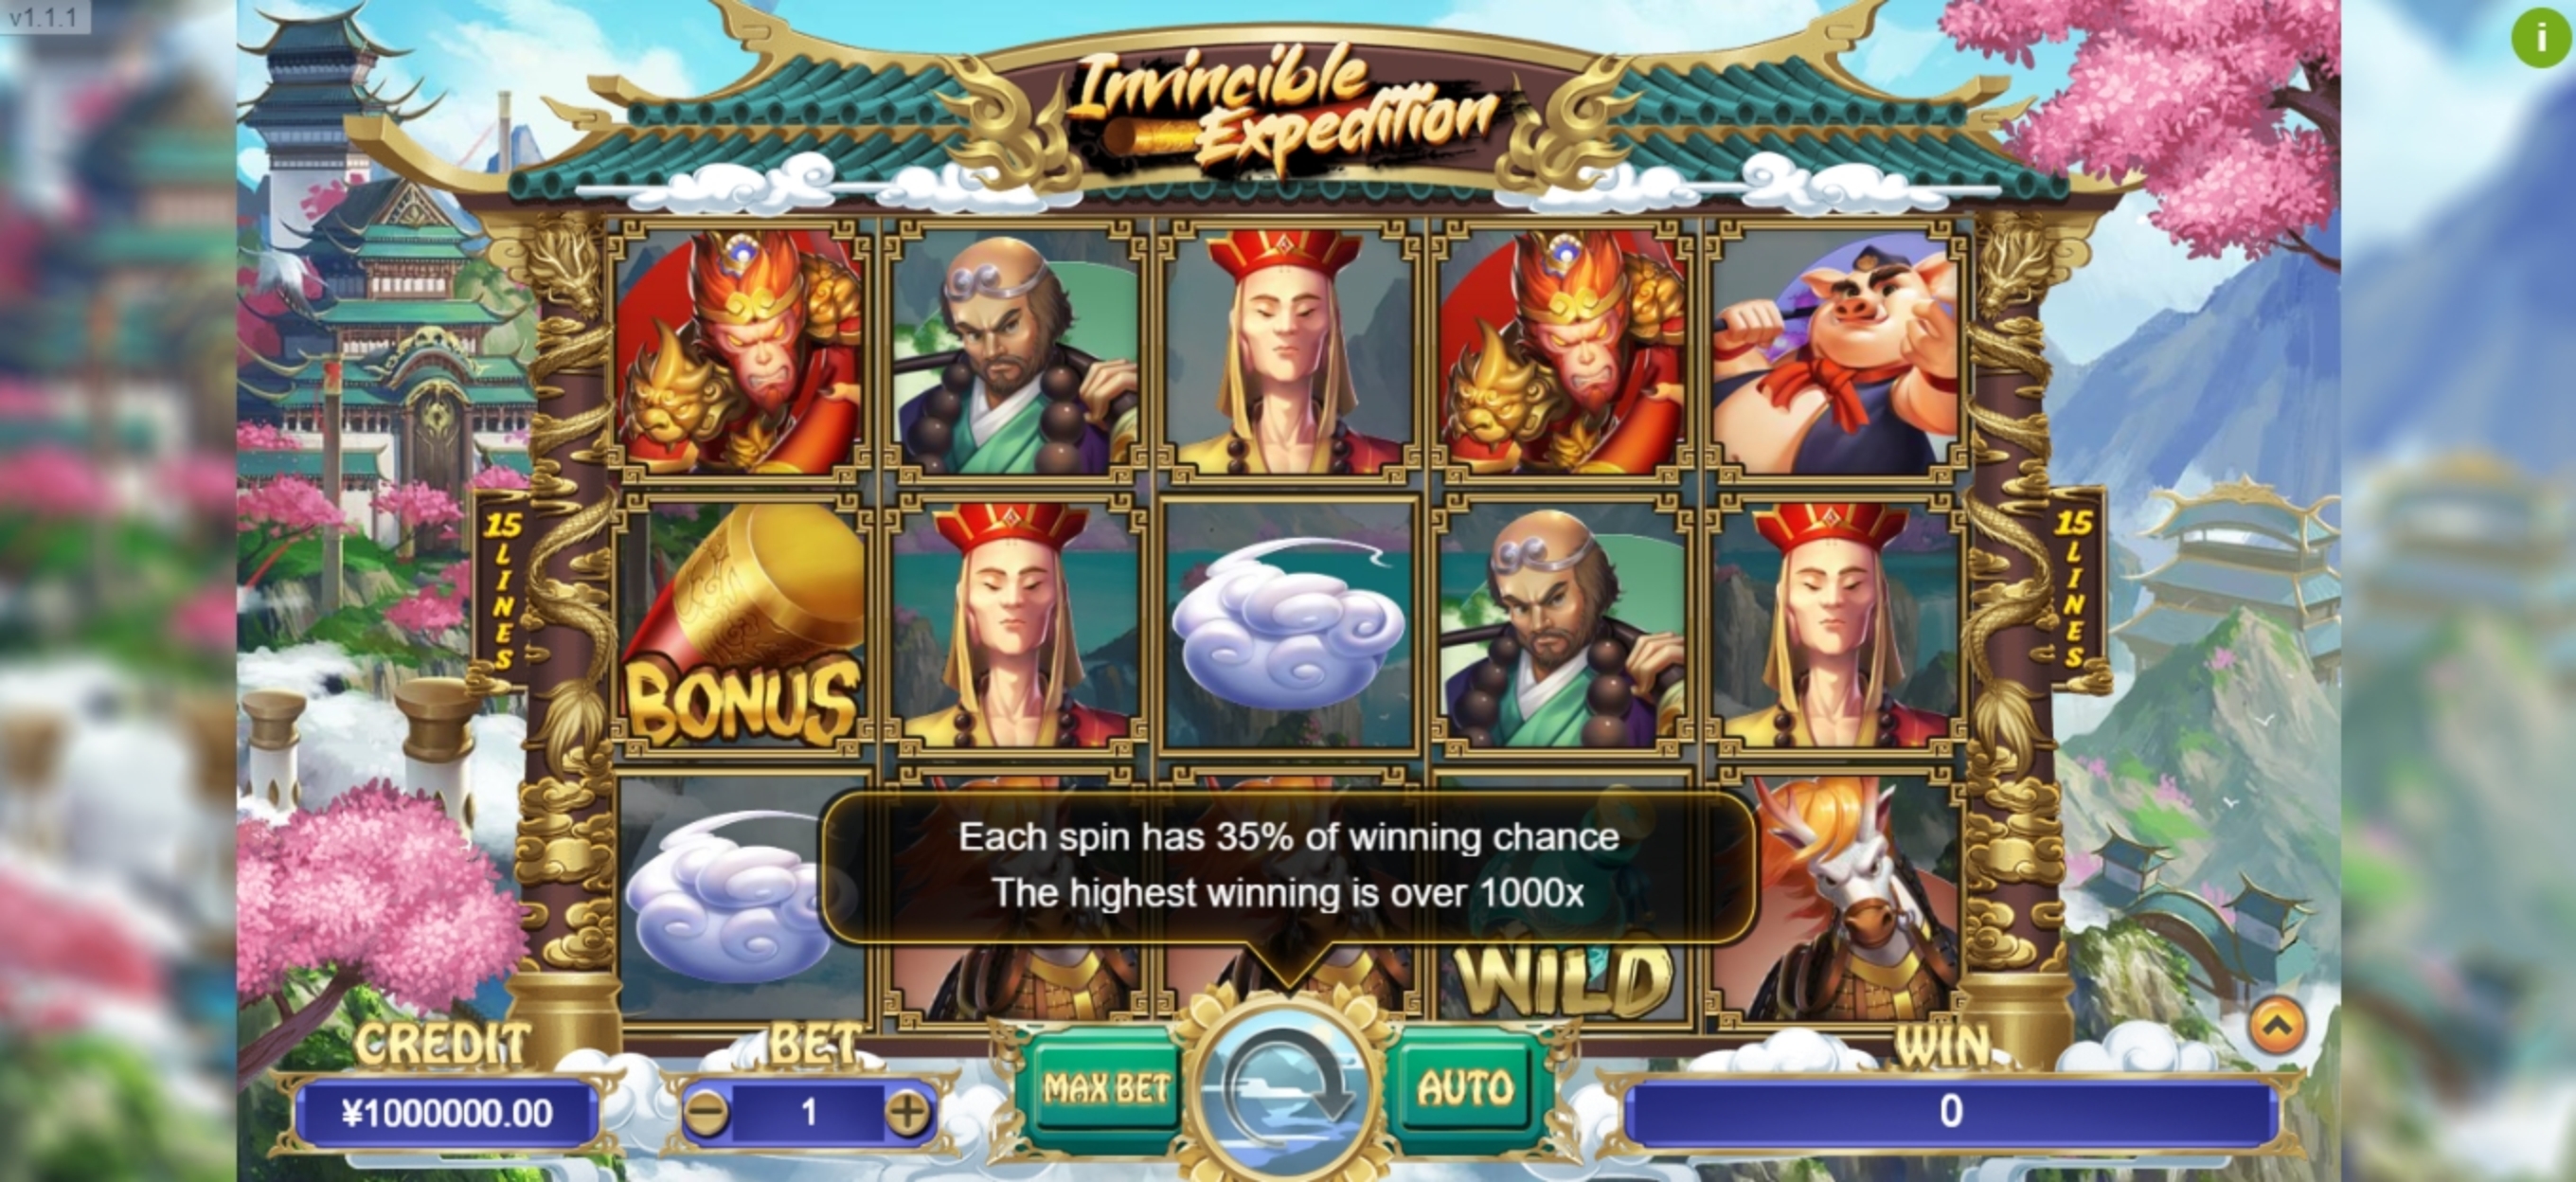 Reels in Invincible Expedition Slot Game by TIDY